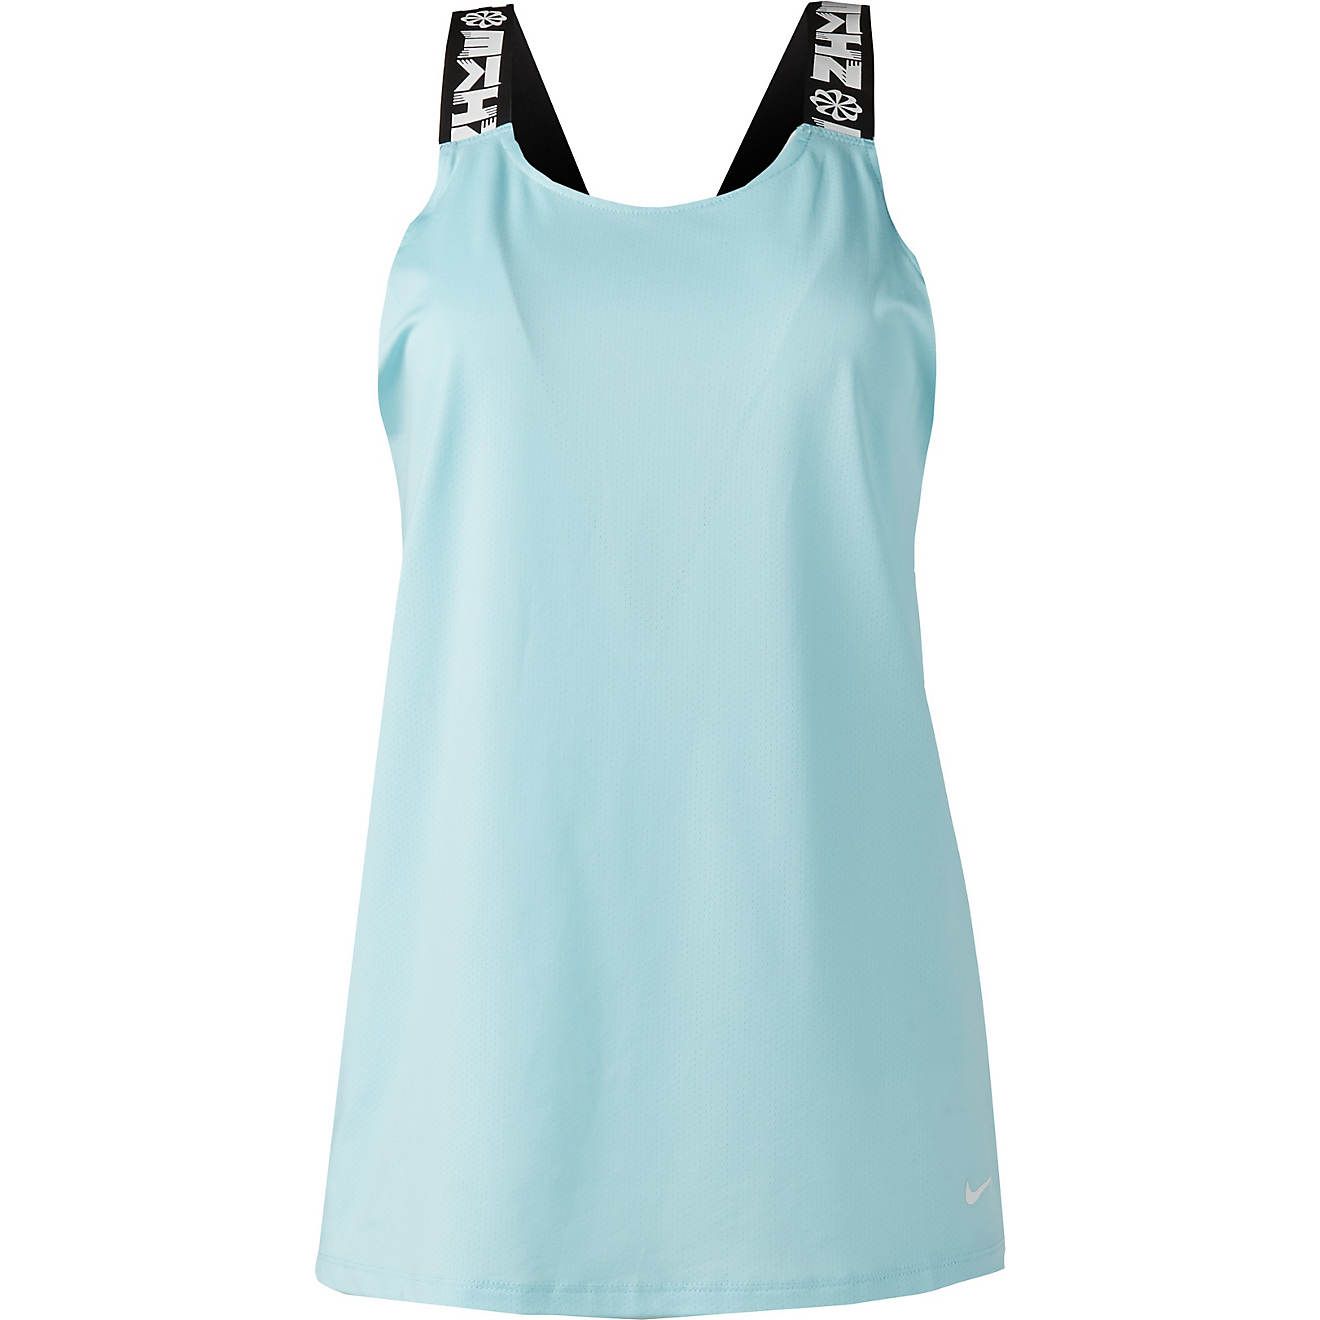 Nike Women's Icon Clash Dri-FIT Training Tank Top | Academy Sports + Outdoor Affiliate